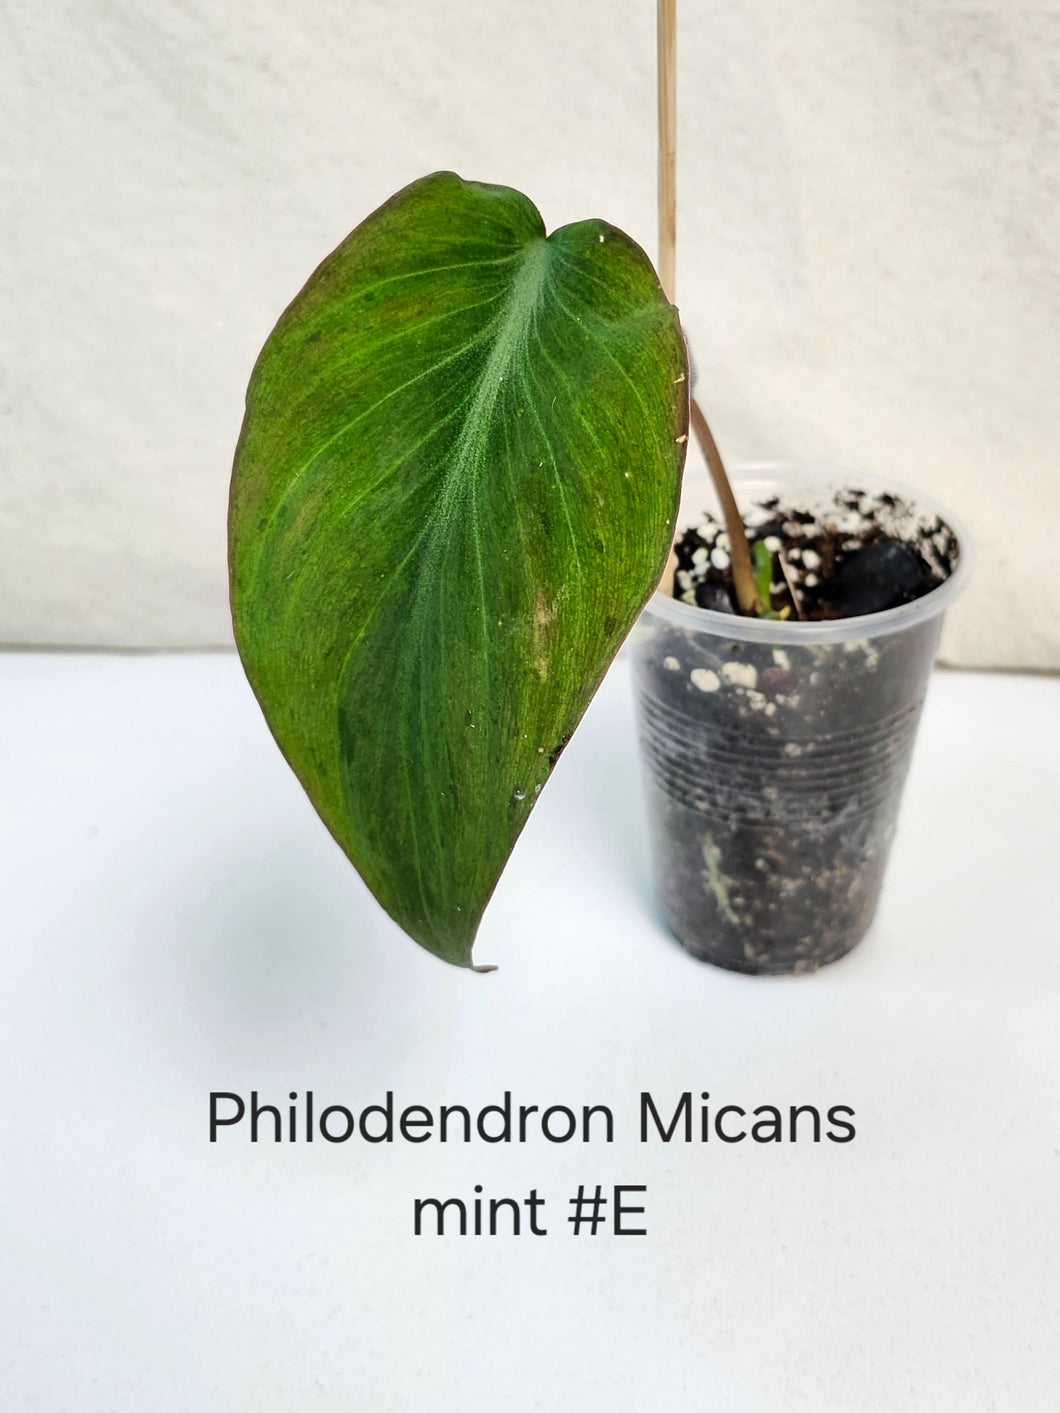 Philodendron Mican mint #E